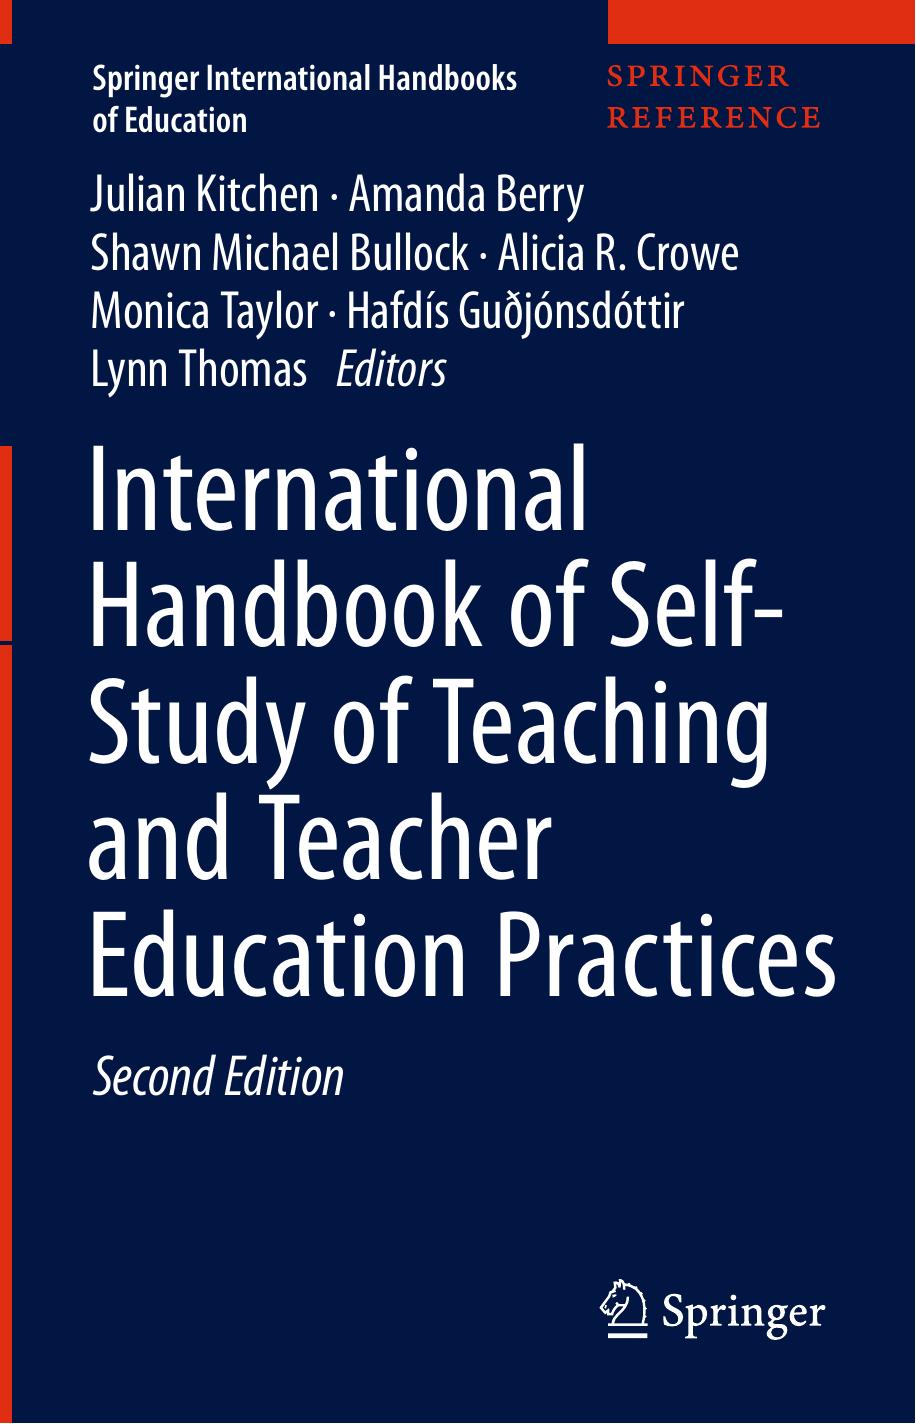 International Handbook of Self-Study of Teaching and Teacher Education Practices, 2nd Edition 2020